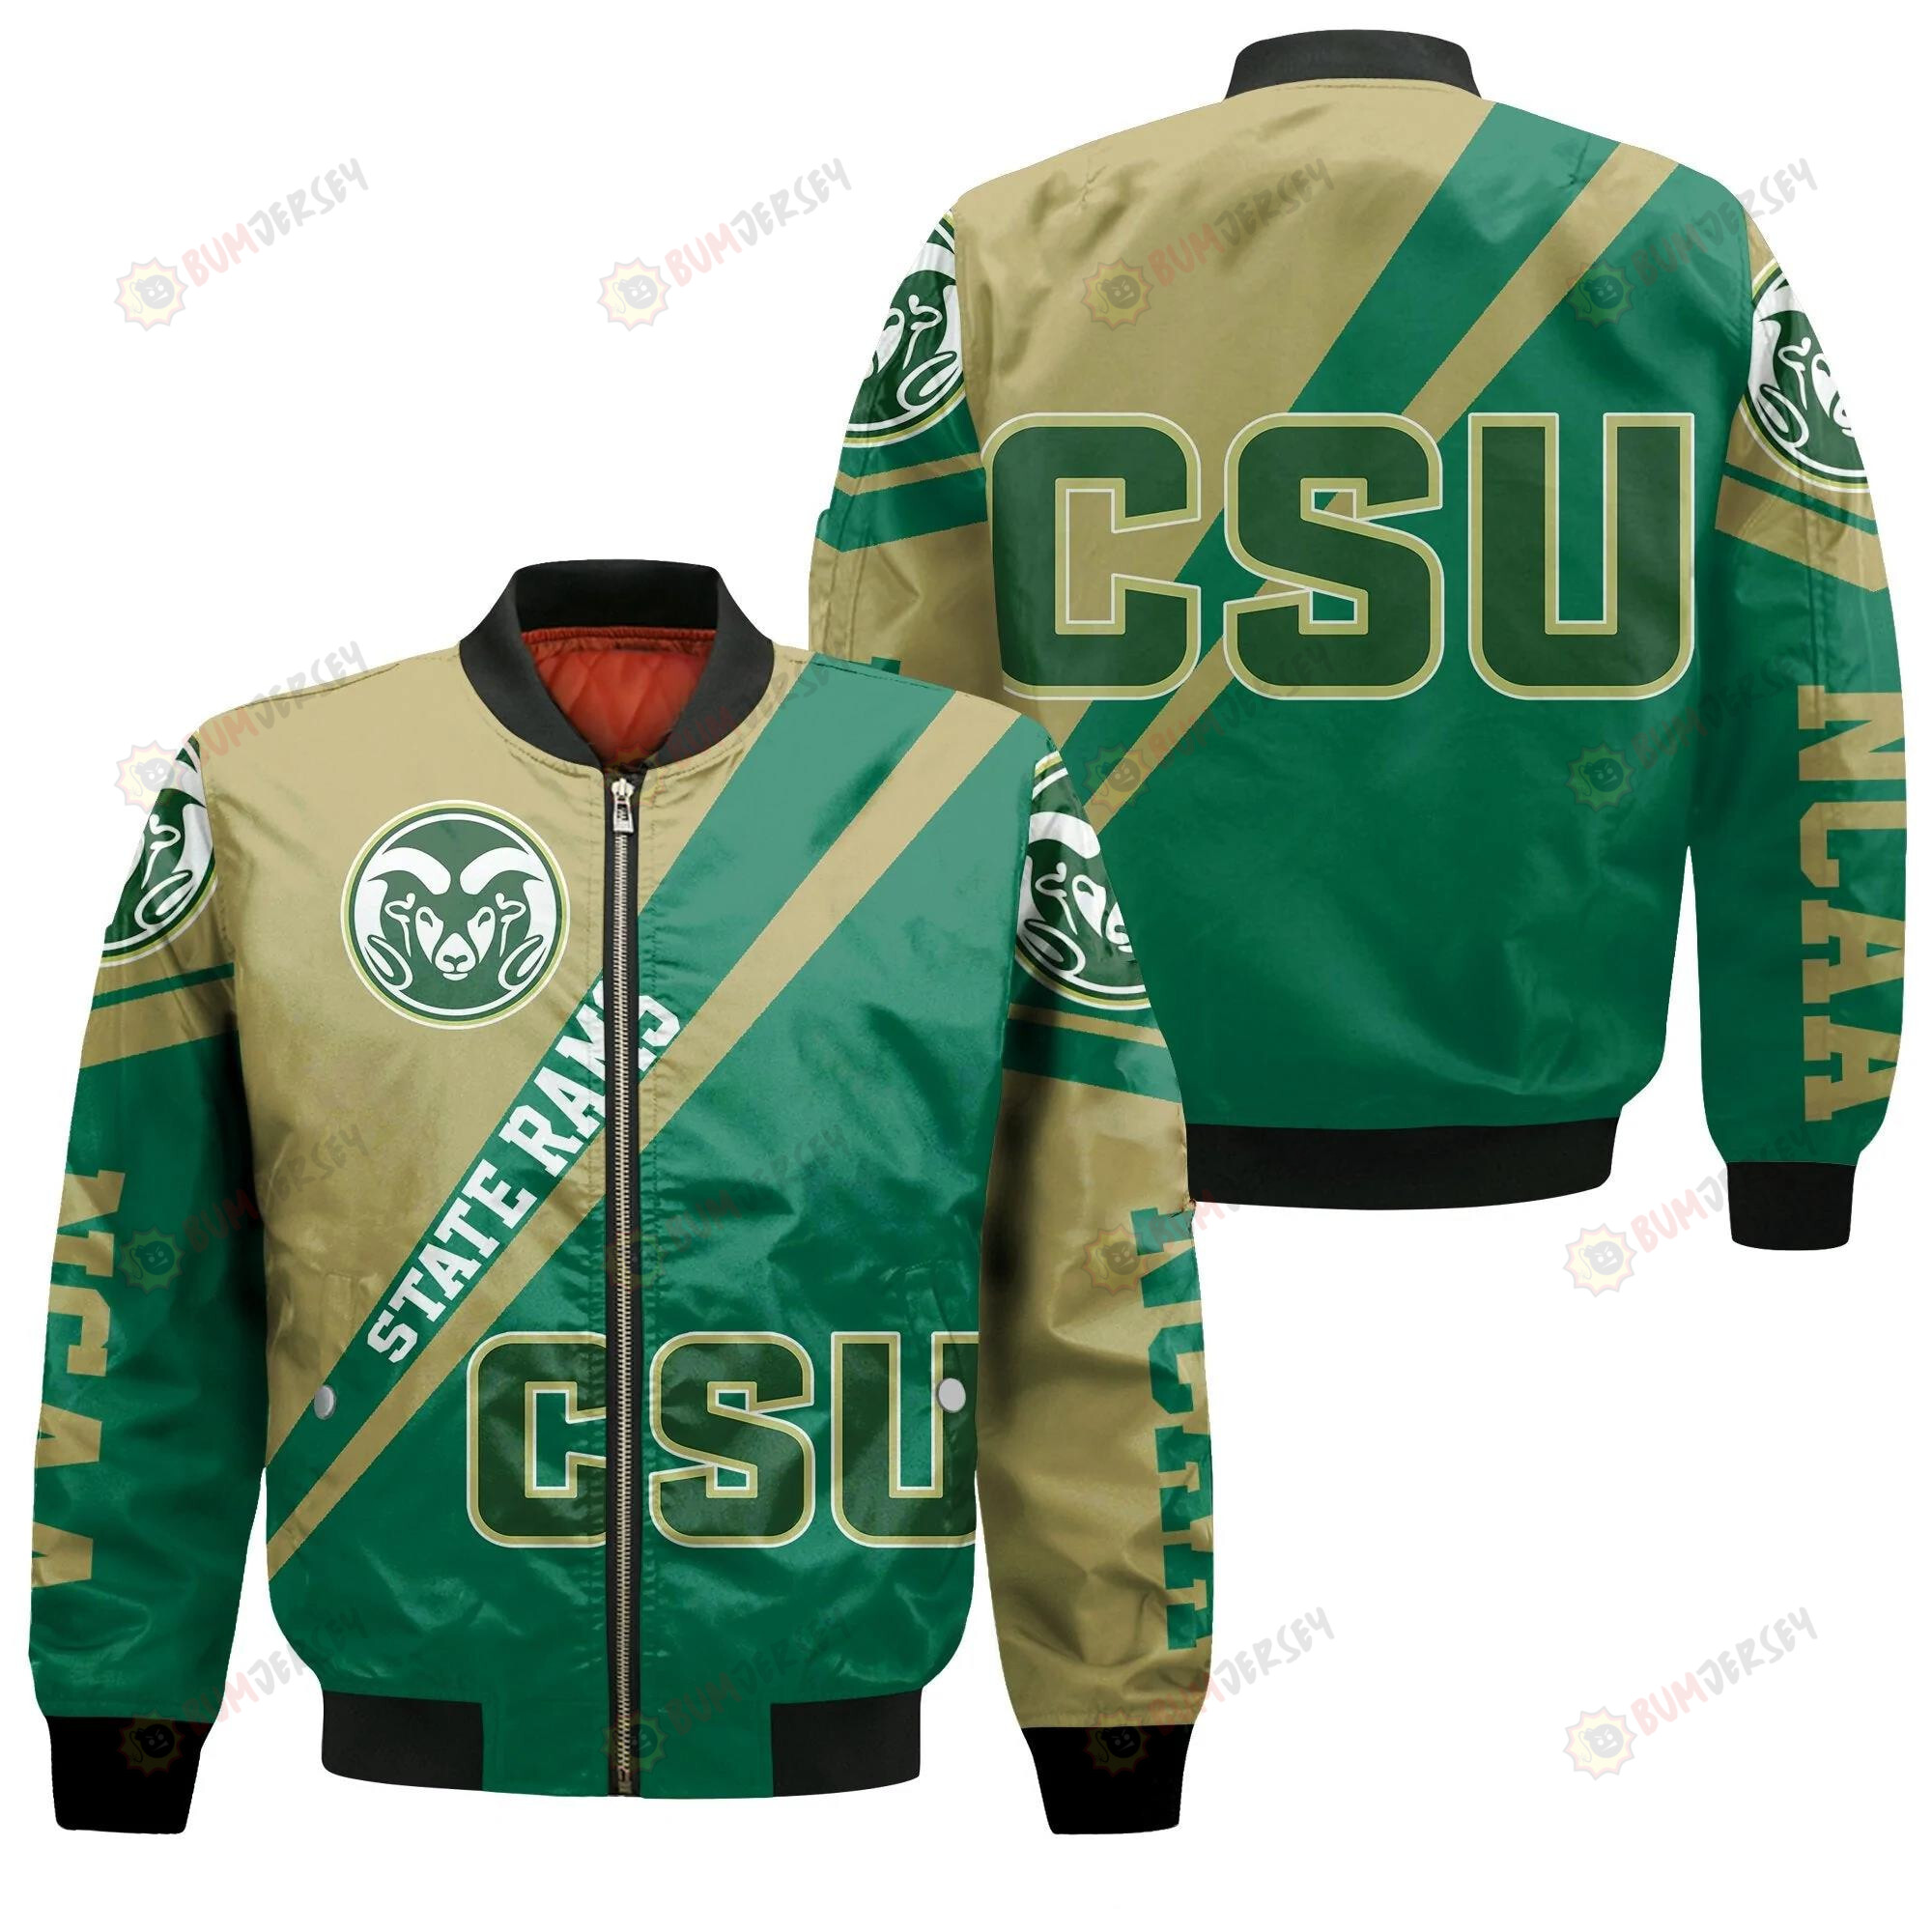 Colorado State Rams Logo Bomber Jacket 3D Printed Cross Style